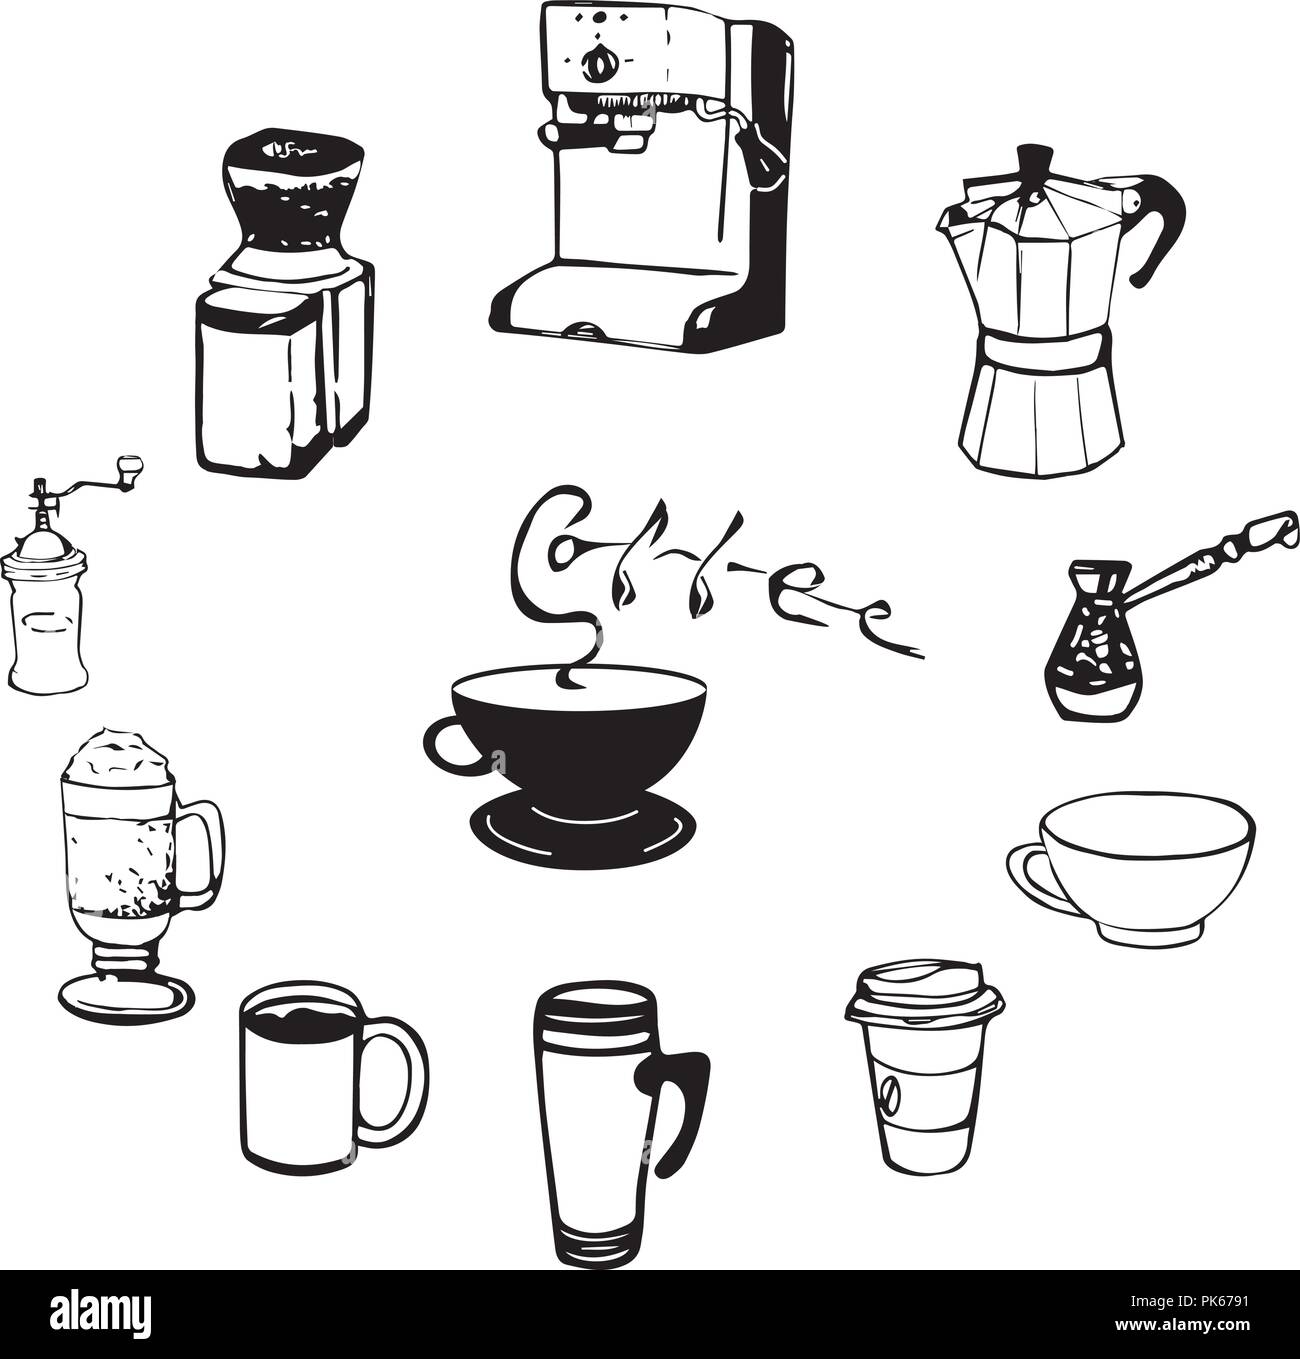 Coffee cups and equipment illustration. Hand drawn coffee